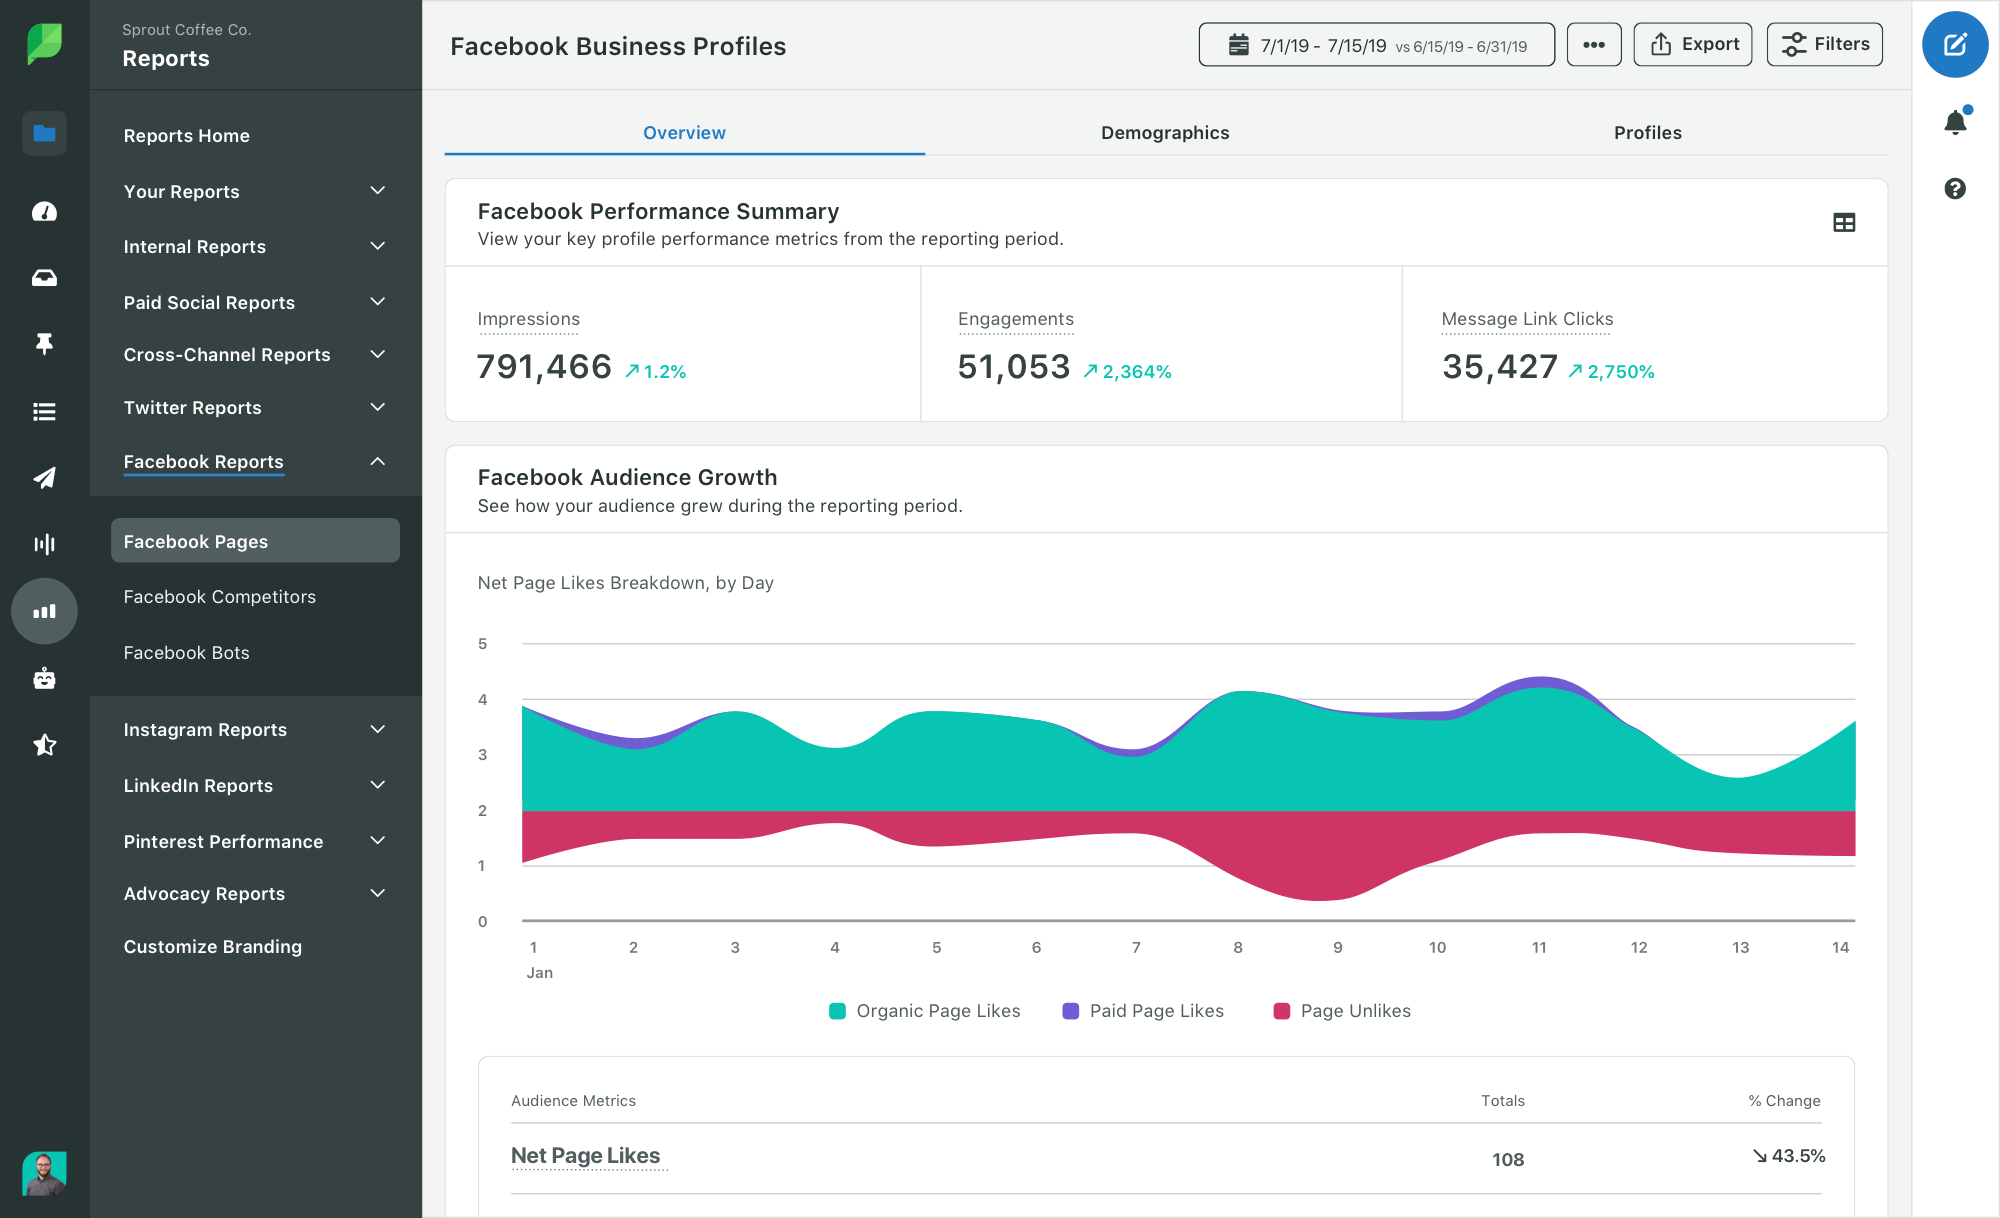 Screenshot of Sprout Social's Facebook Business Profiles report